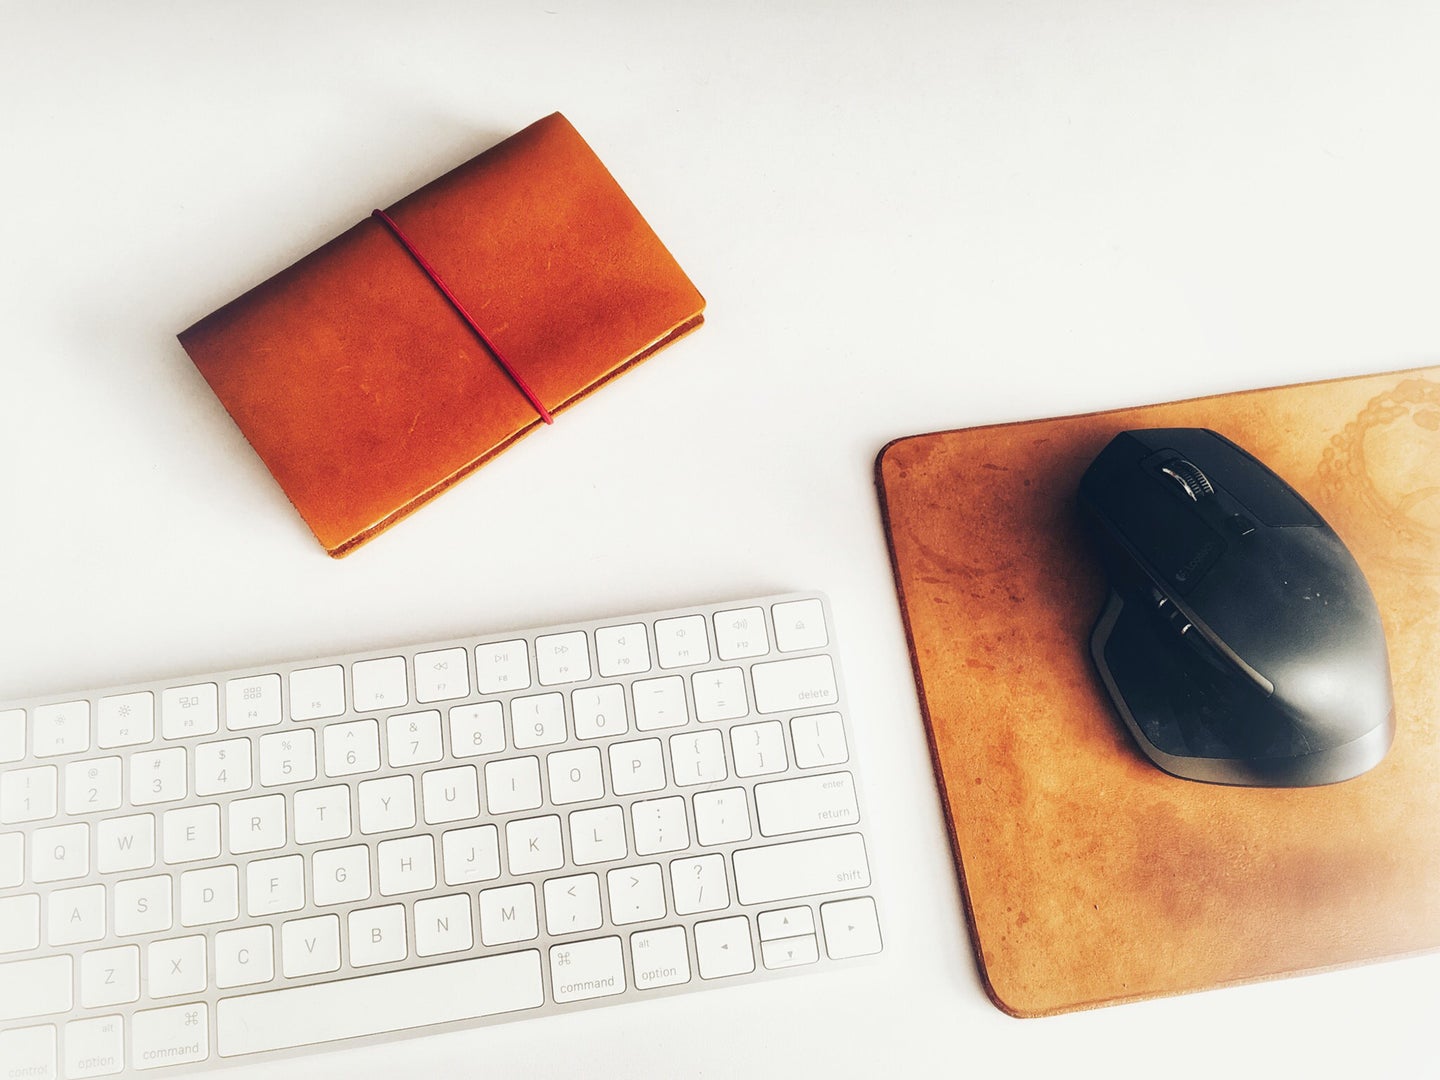 keyboard, leather mouse pad, and mouse on a white surface